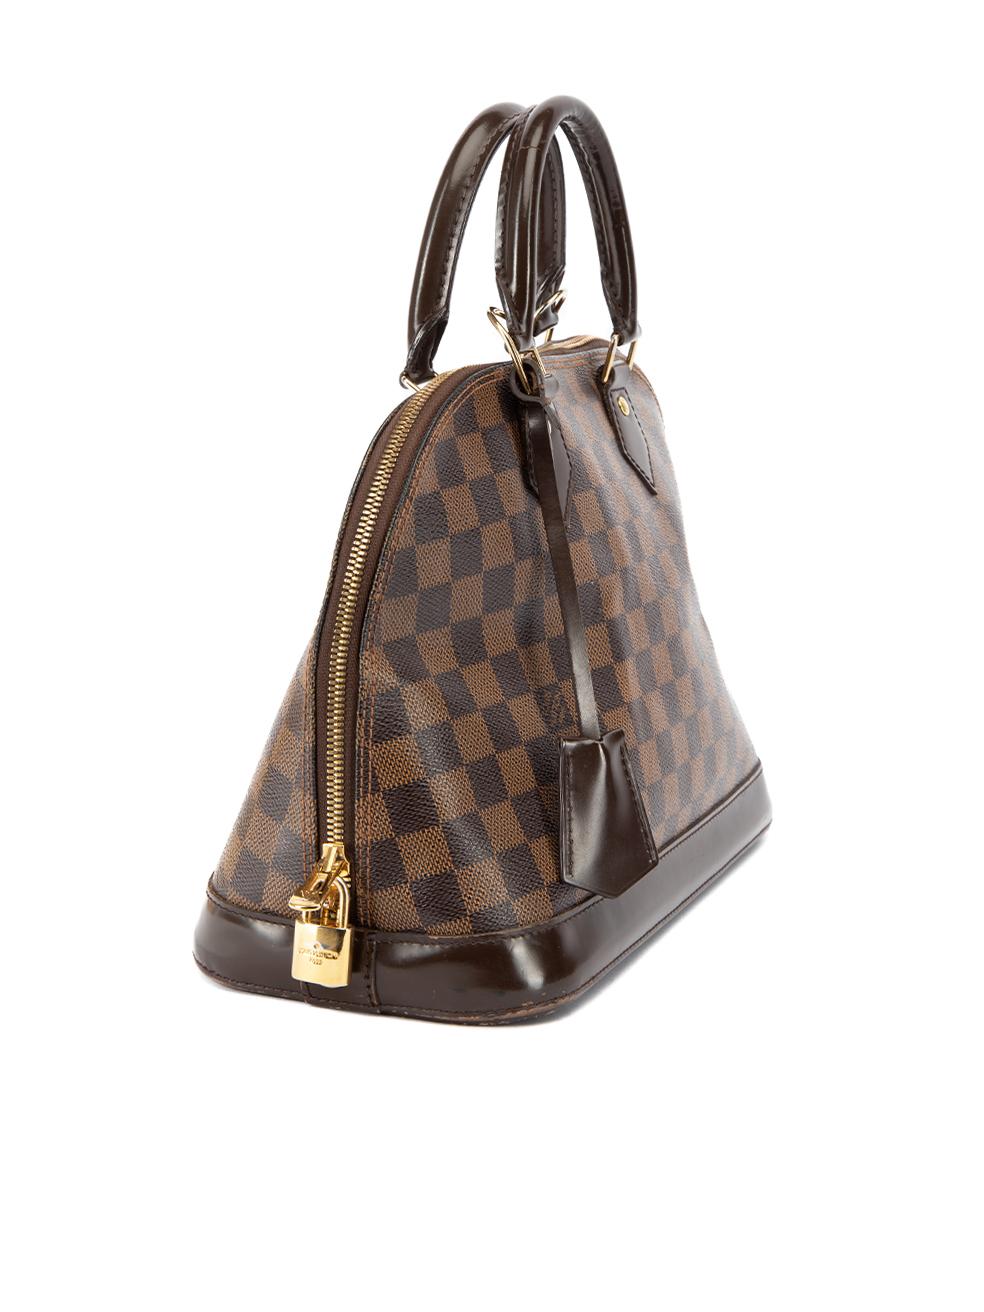 CONDITION is Very good. Minimal wear to bag is evident. Visible signs of wear to the bag interior where stains can be seen and the exterior leather at the bottom of the bag is scuffed, especially around the corners and bottom of bag. There is also